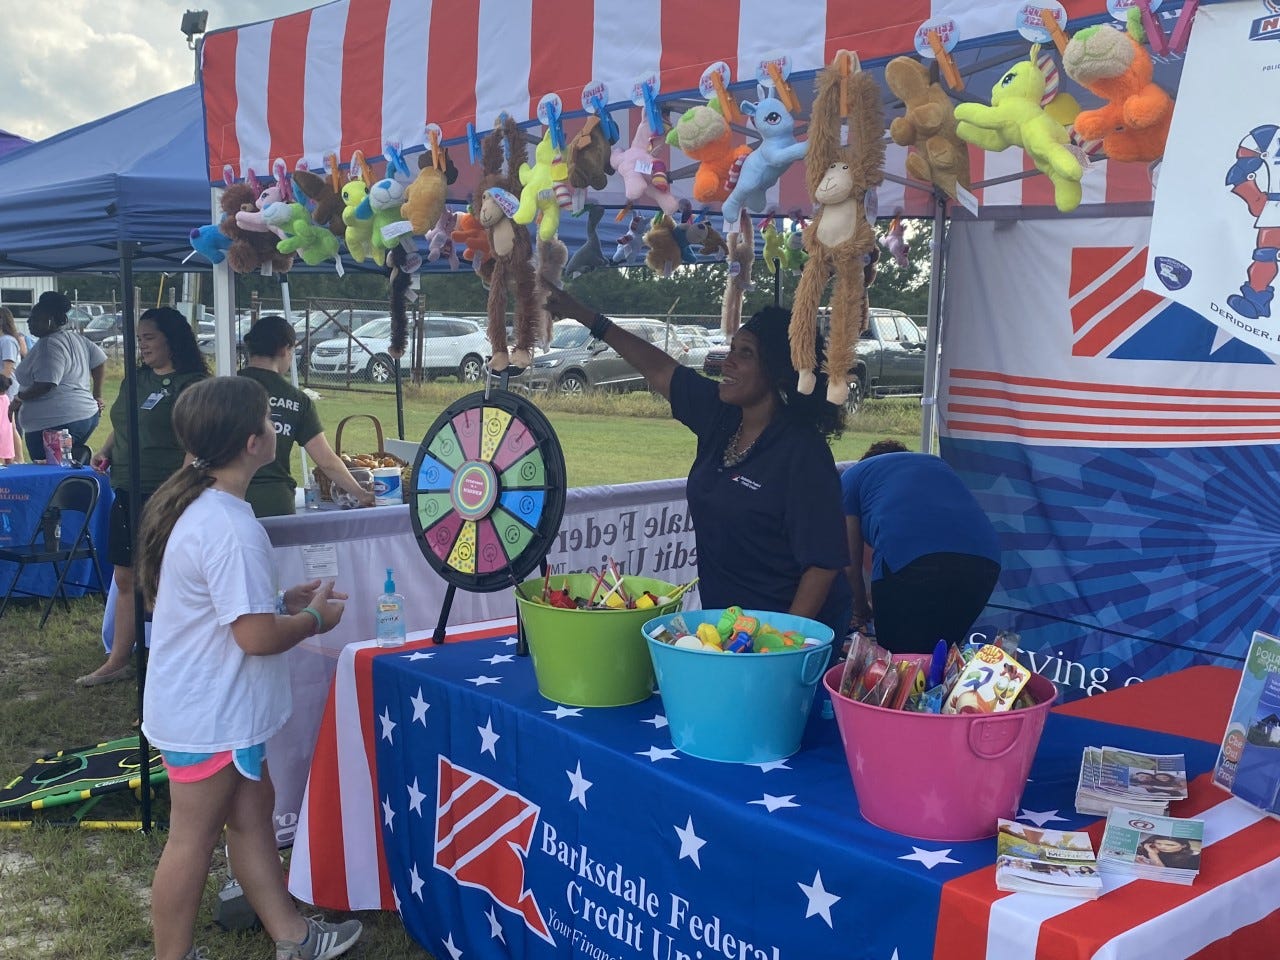 There was plenty of fun and games at National Night out 2021.